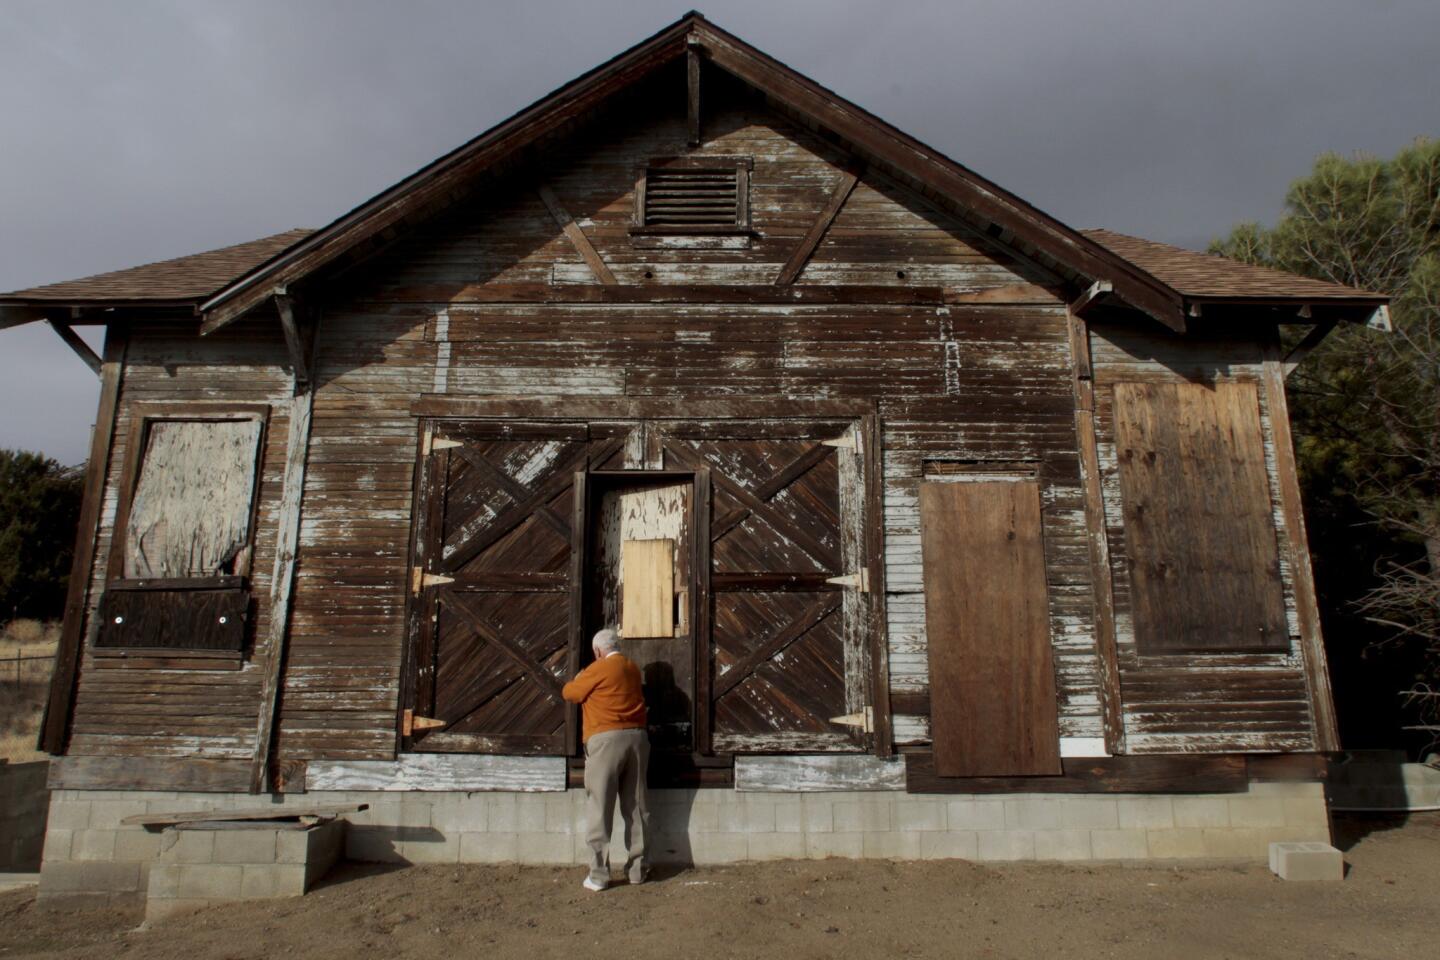 John Seymour of the West Antelope Valley Historical Society unlocks the Old Leona Valley Schoolhouse. Built a century ago, its inside is gutted, but its floor plan and design remain mostly intact.